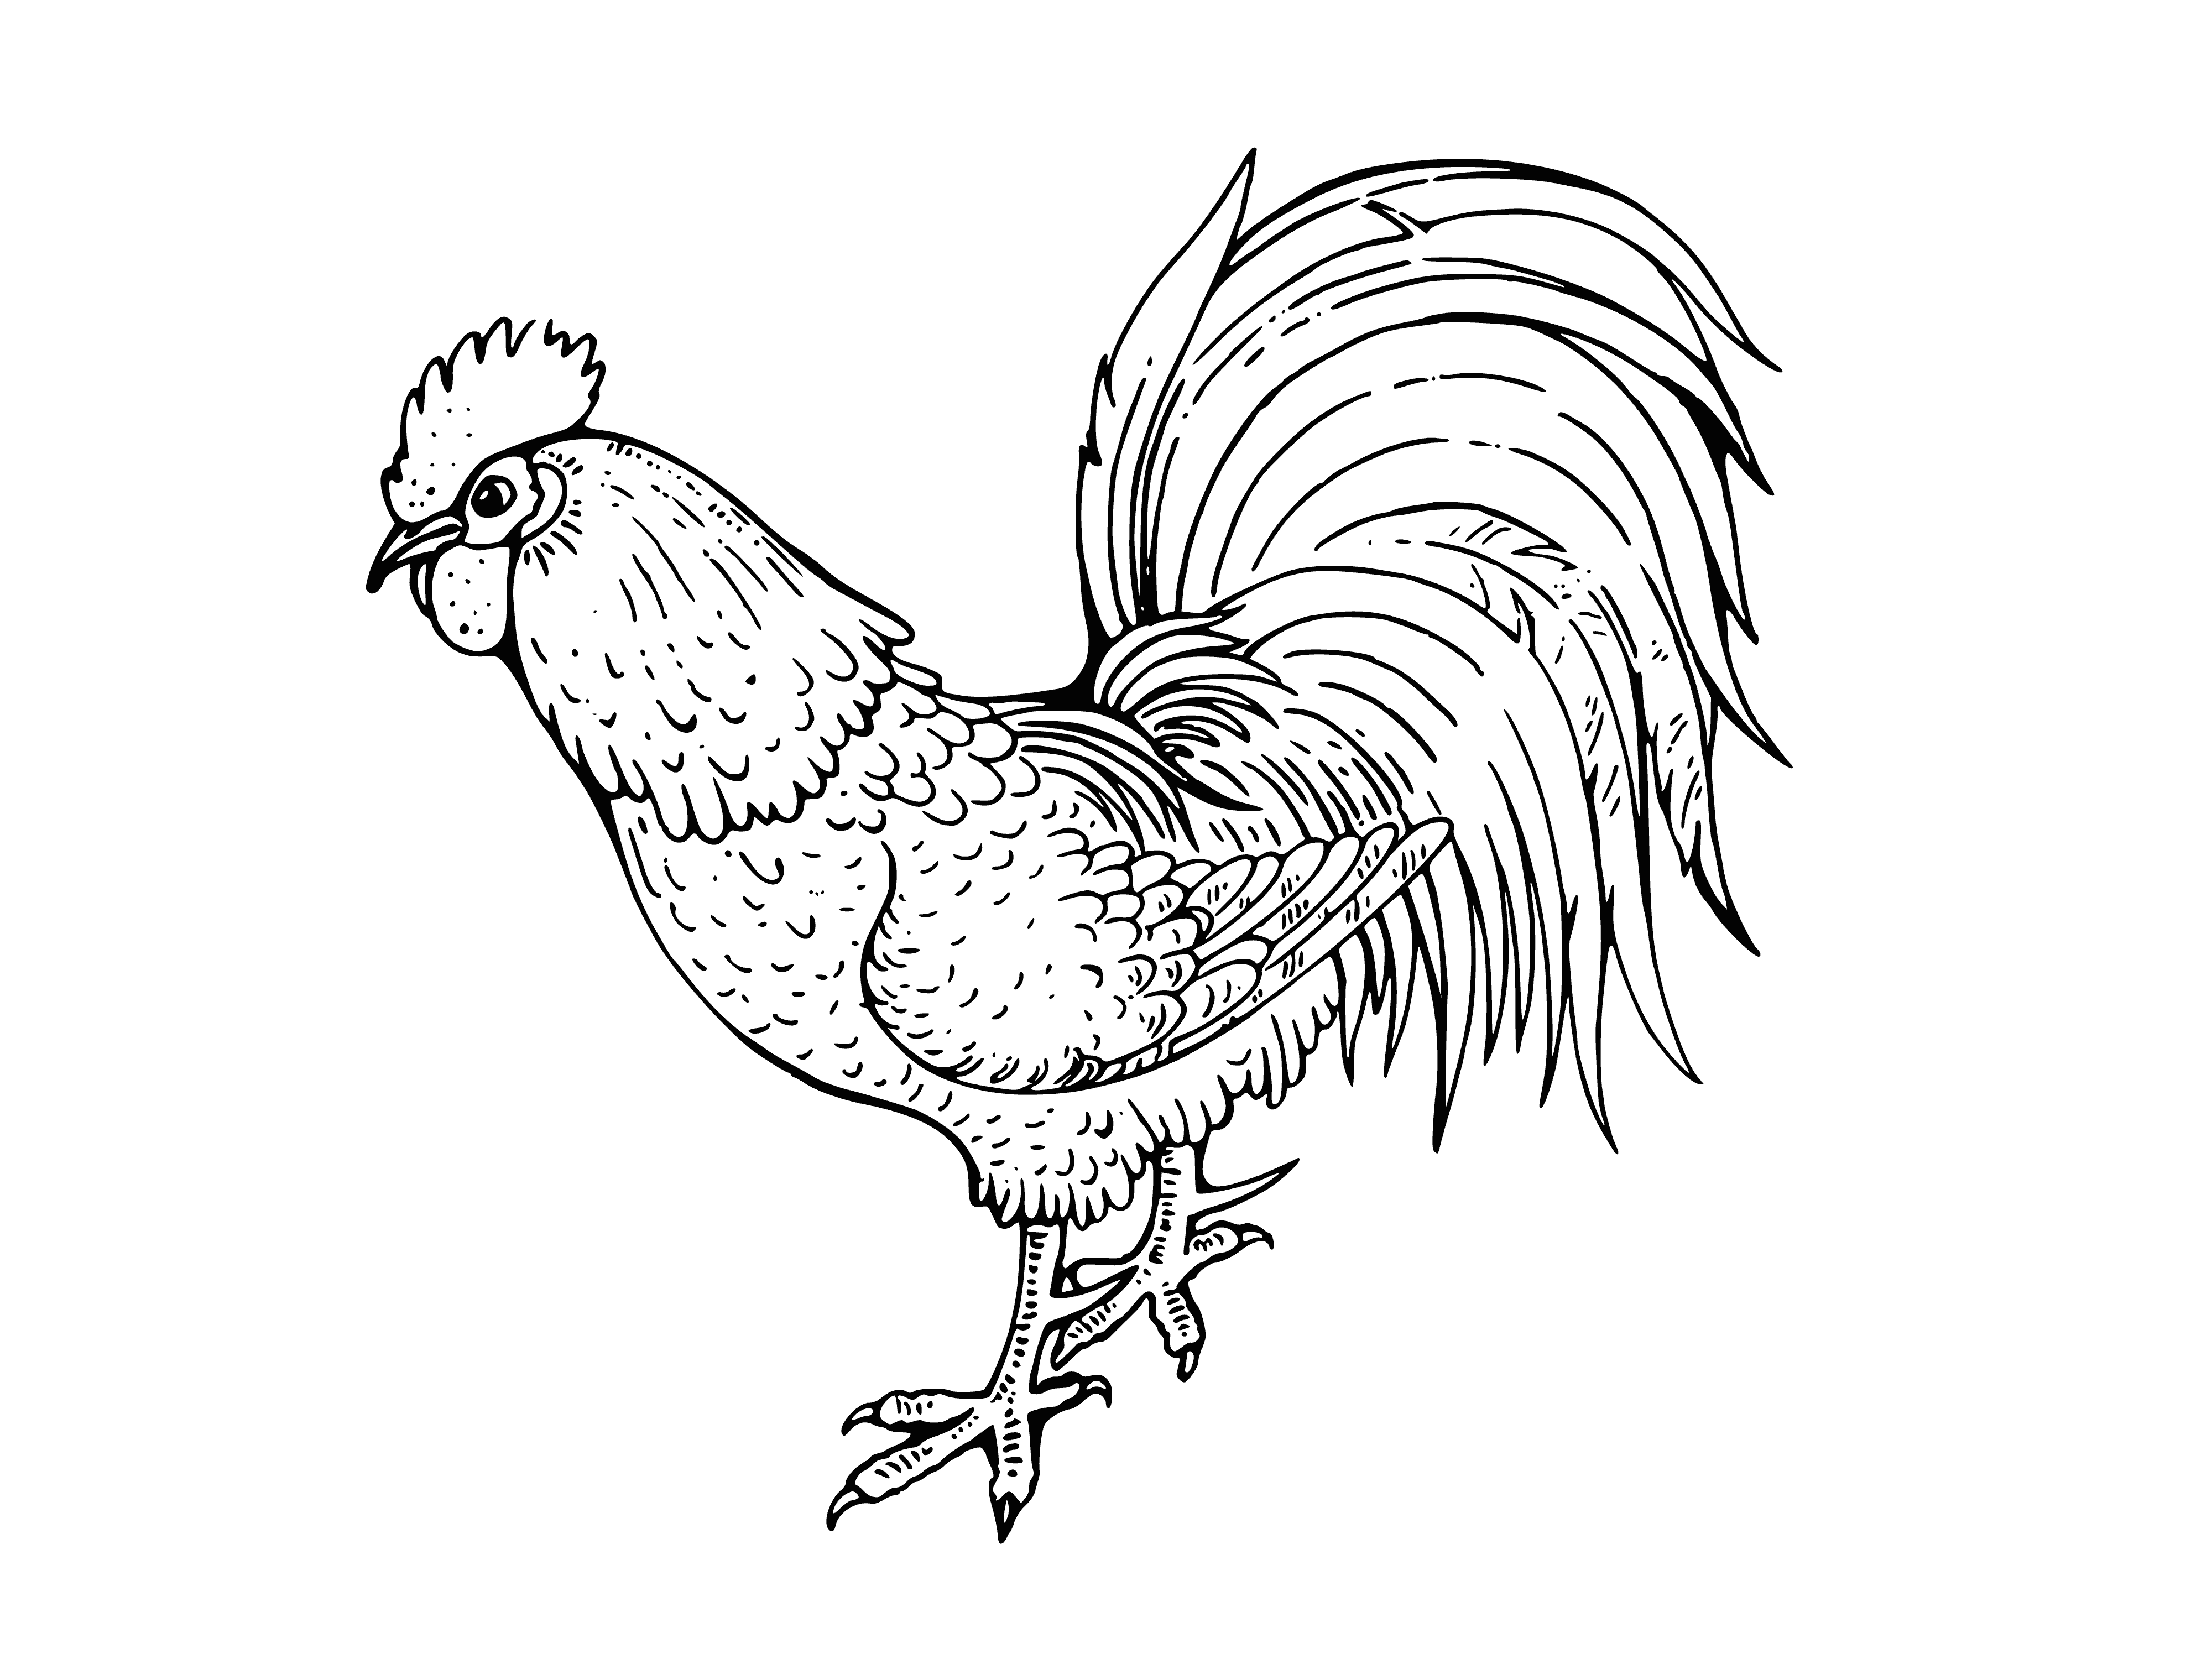 coloring page: Rooster has long neck, big beak, yellow head, red comb and black feathers; long tail.